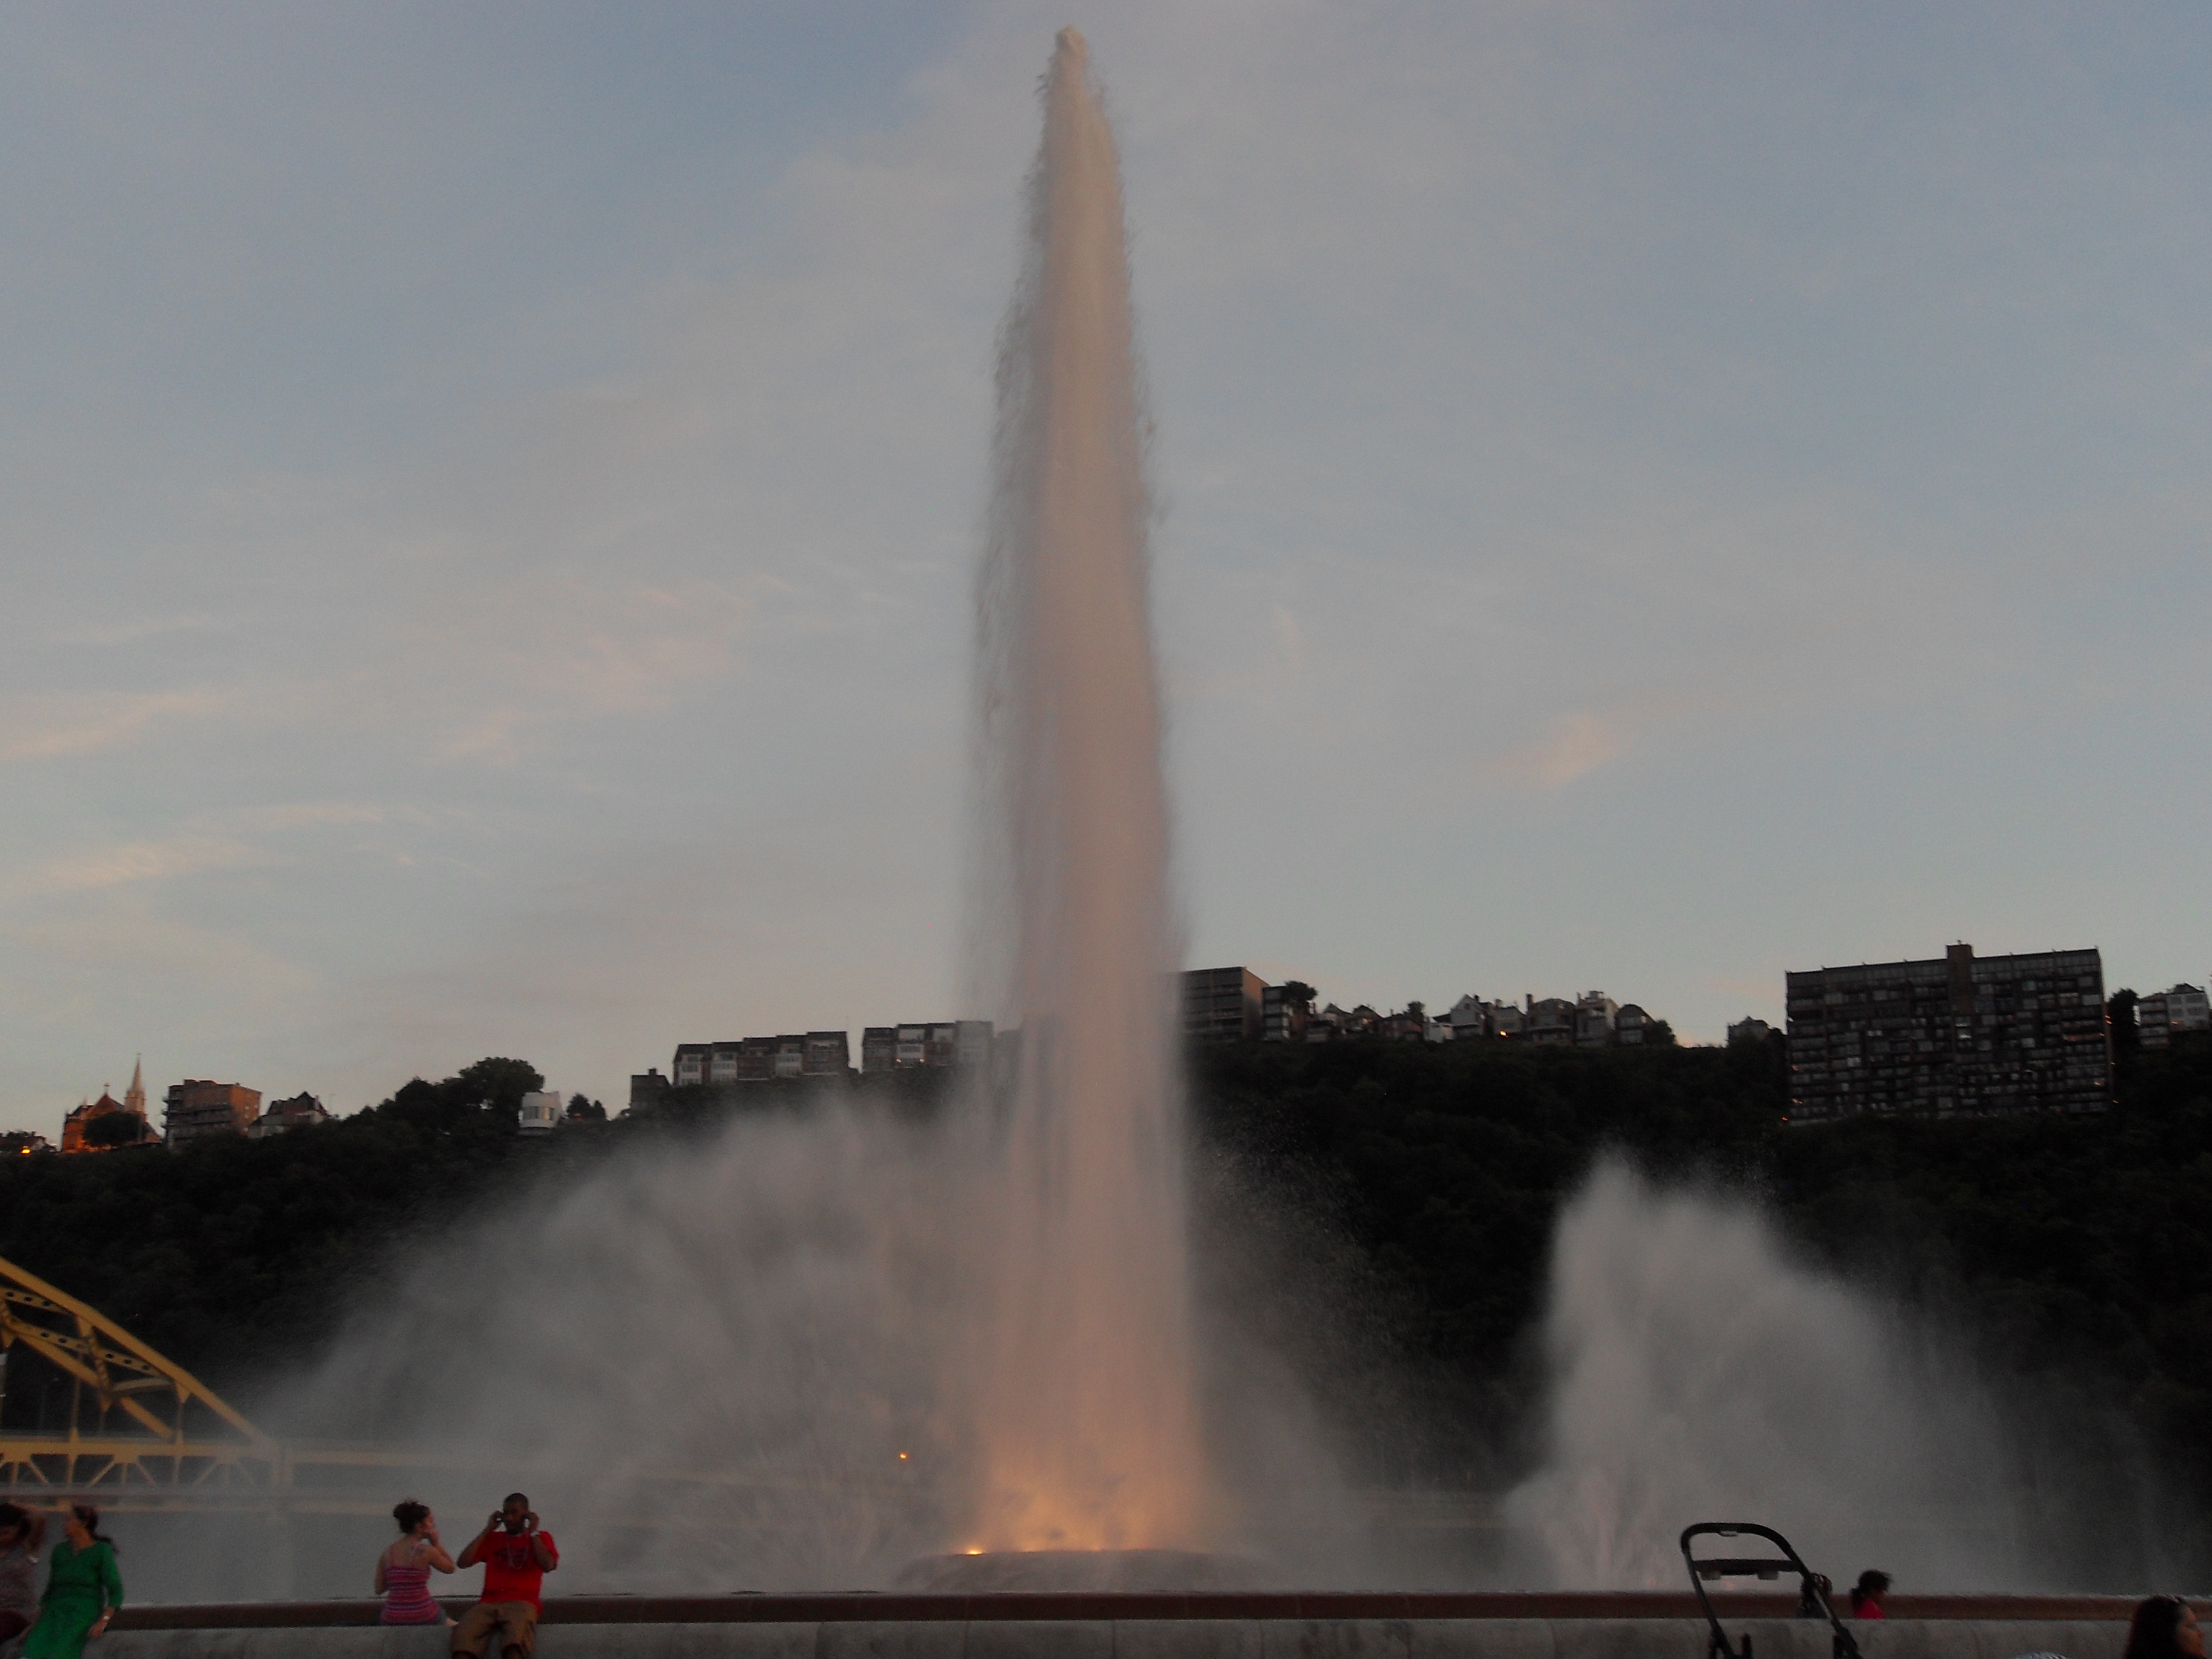 The Fountain-at-the-Point